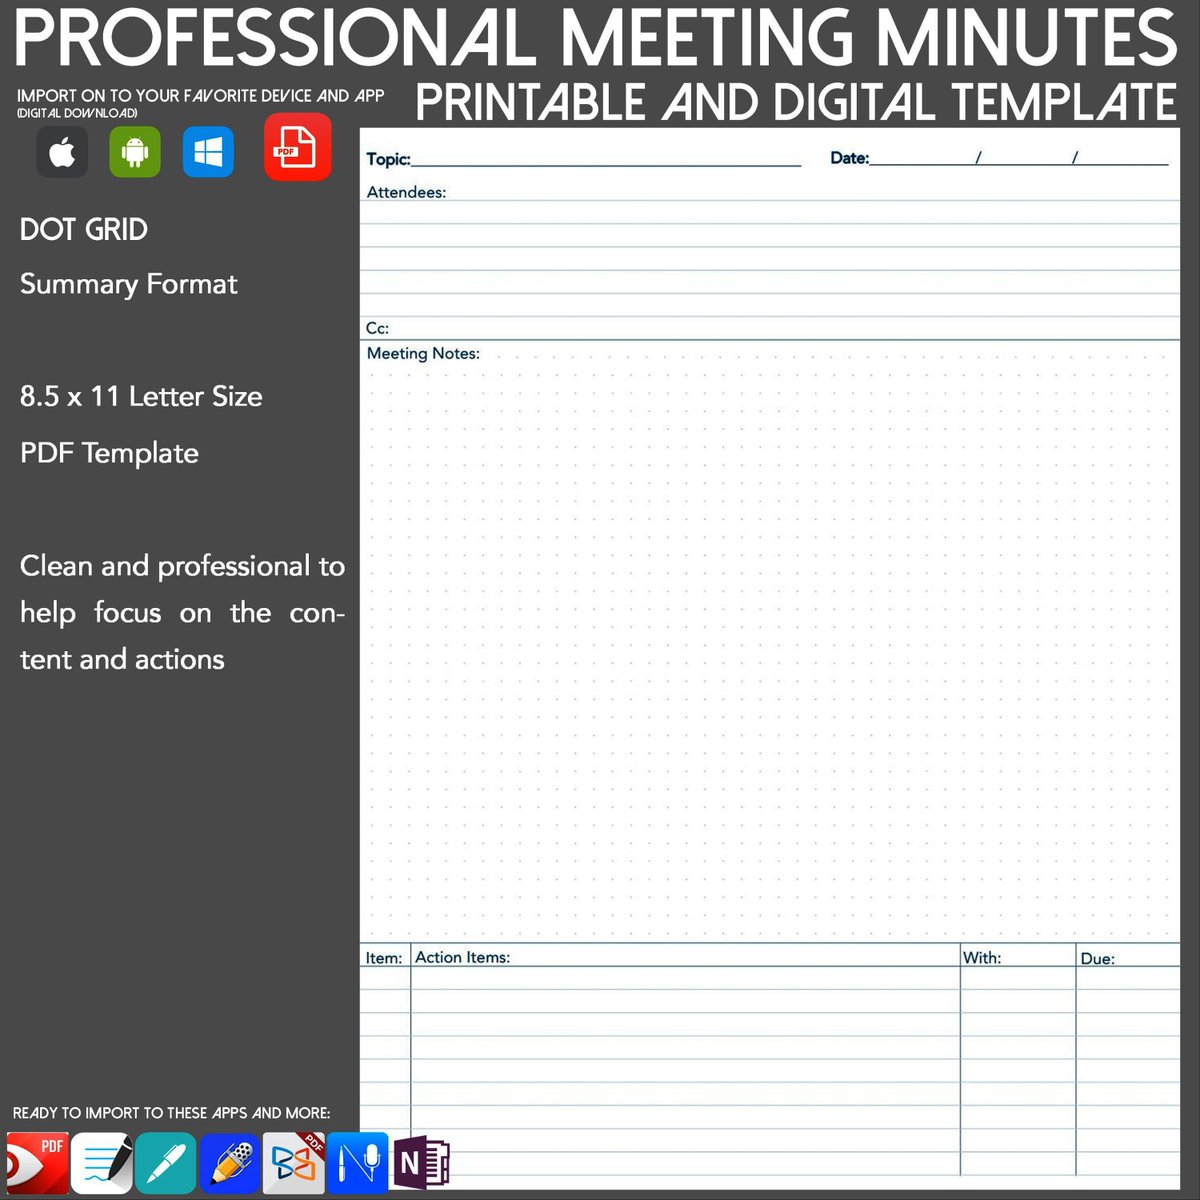 my #etsy shop: Digital Paper, Paper Insert Meeting Minute Template Printable Instant Download (PDF) etsy.me/2tUrk89 #papergoods #calendar #white #clear #todolist #pdfplanner #ipadpro #agendadiary #printableplanner #conference #productivityplanner #university